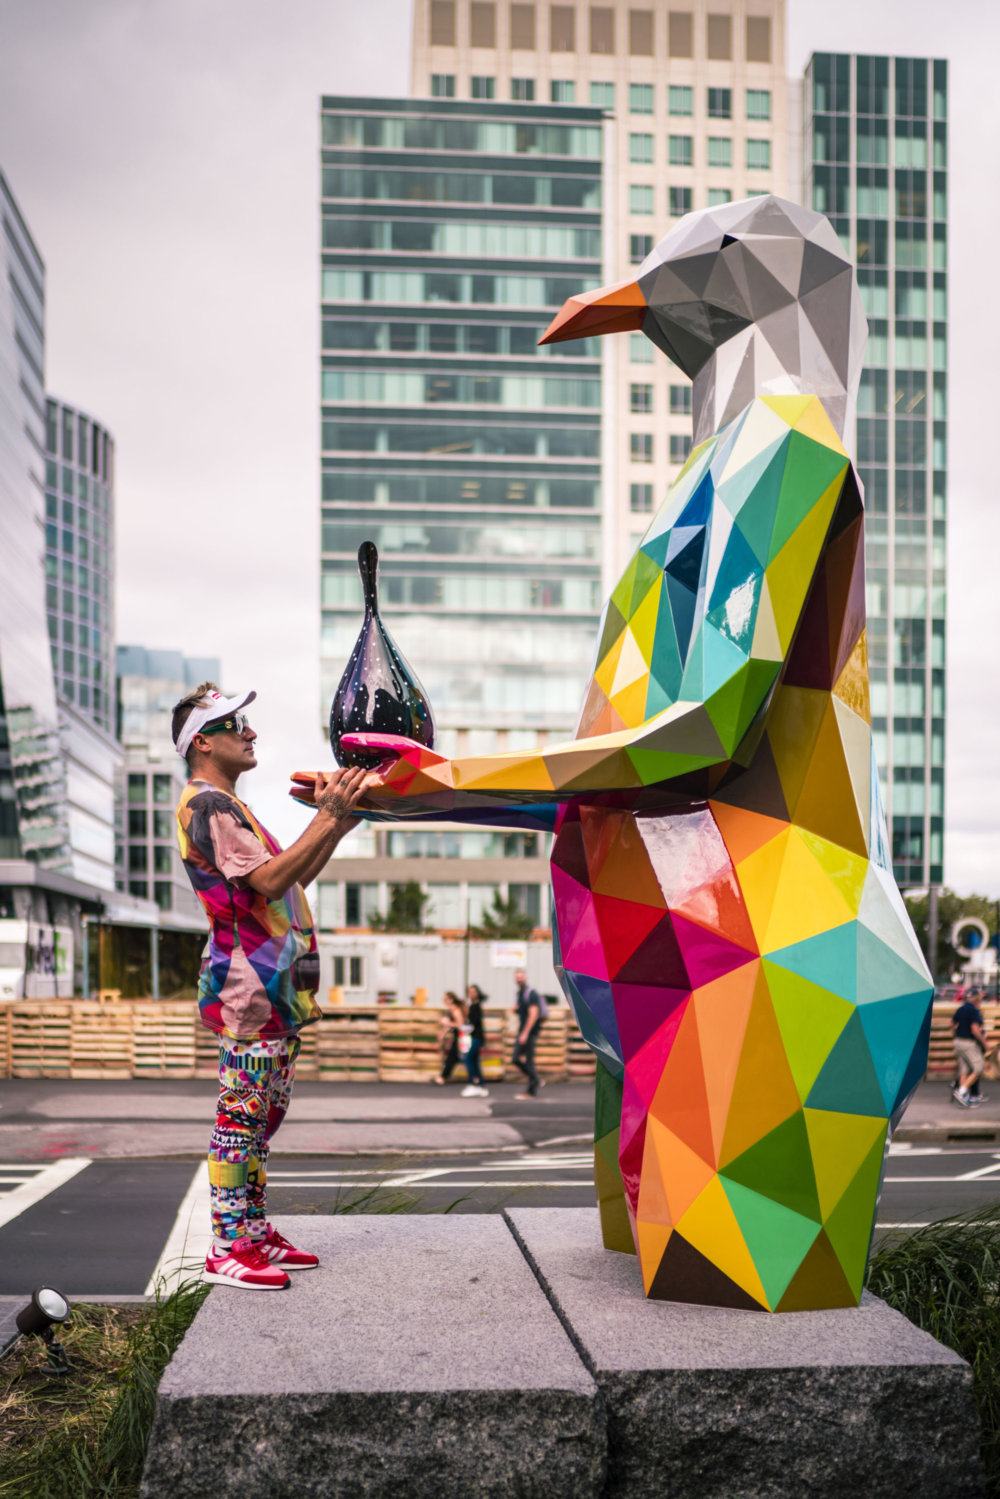 Air Sea And Land An Urban Intervention With Colorful Low Poly Sculptures By Okuda San Miguel 1